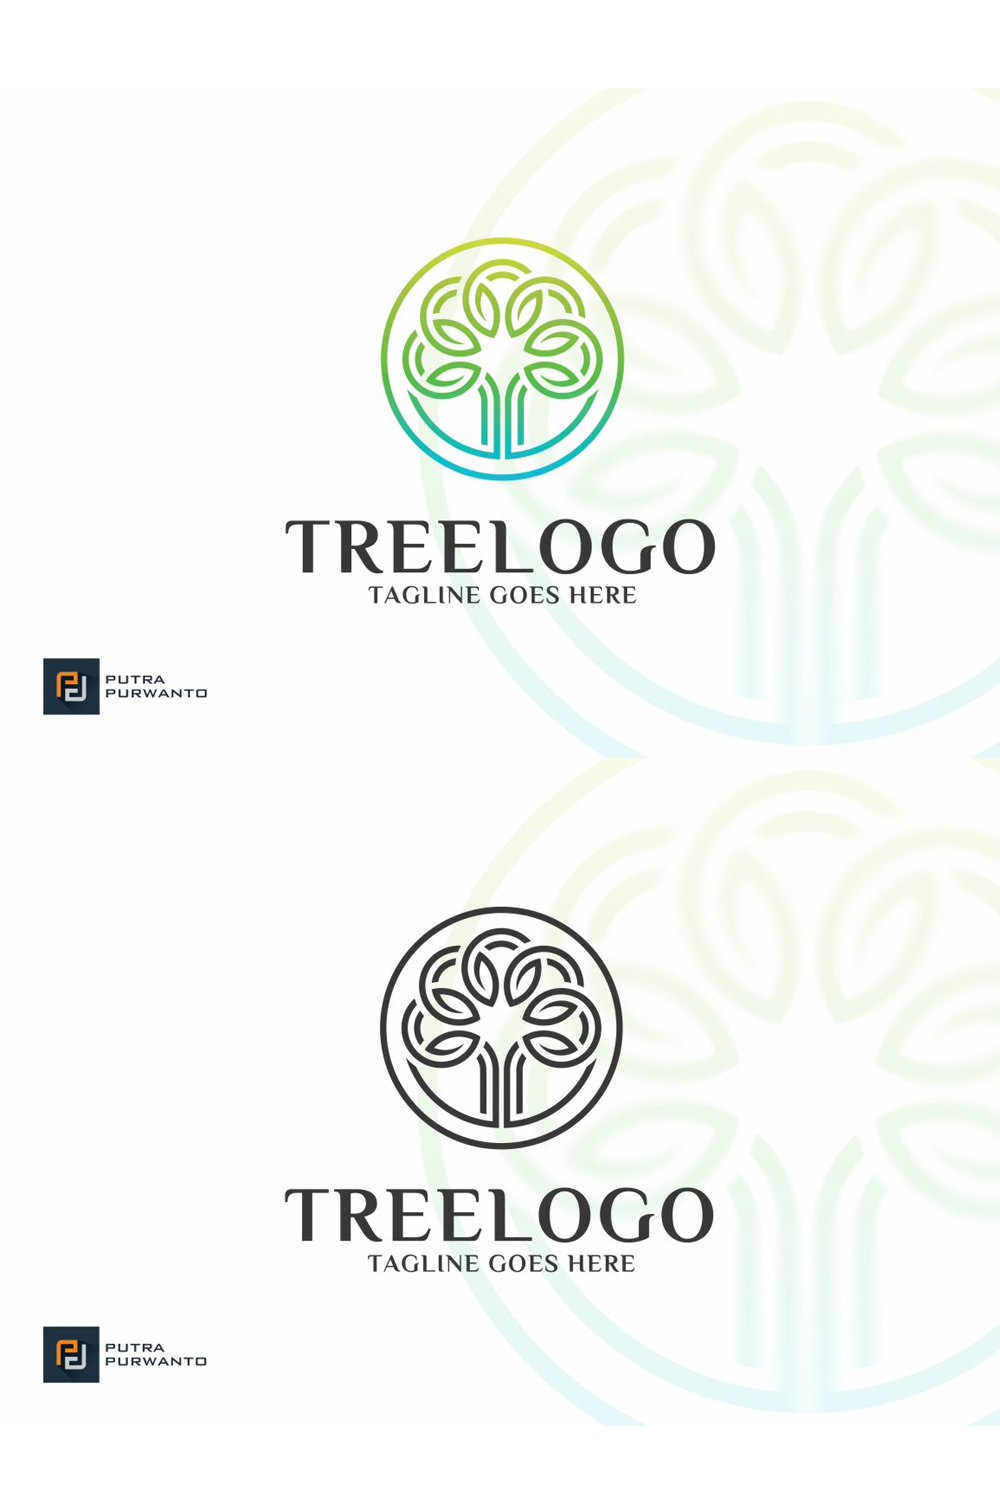 Two treelogos with and without color.